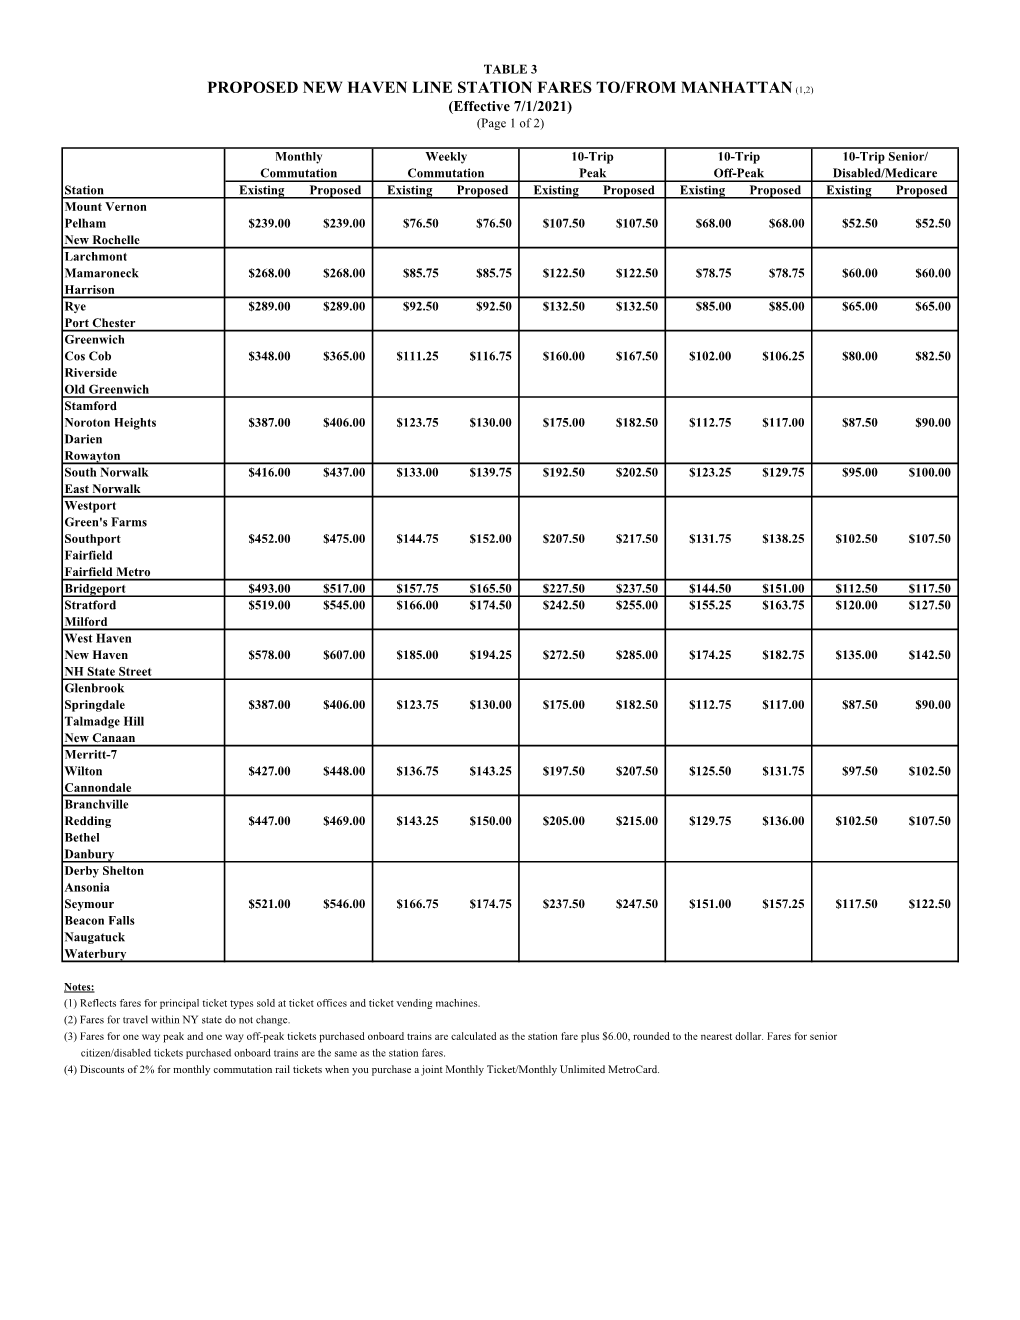 PROPOSED NEW HAVEN LINE STATION FARES TO/FROM MANHATTAN (1,2) (Effective 7/1/2021) (Page 1 of 2)